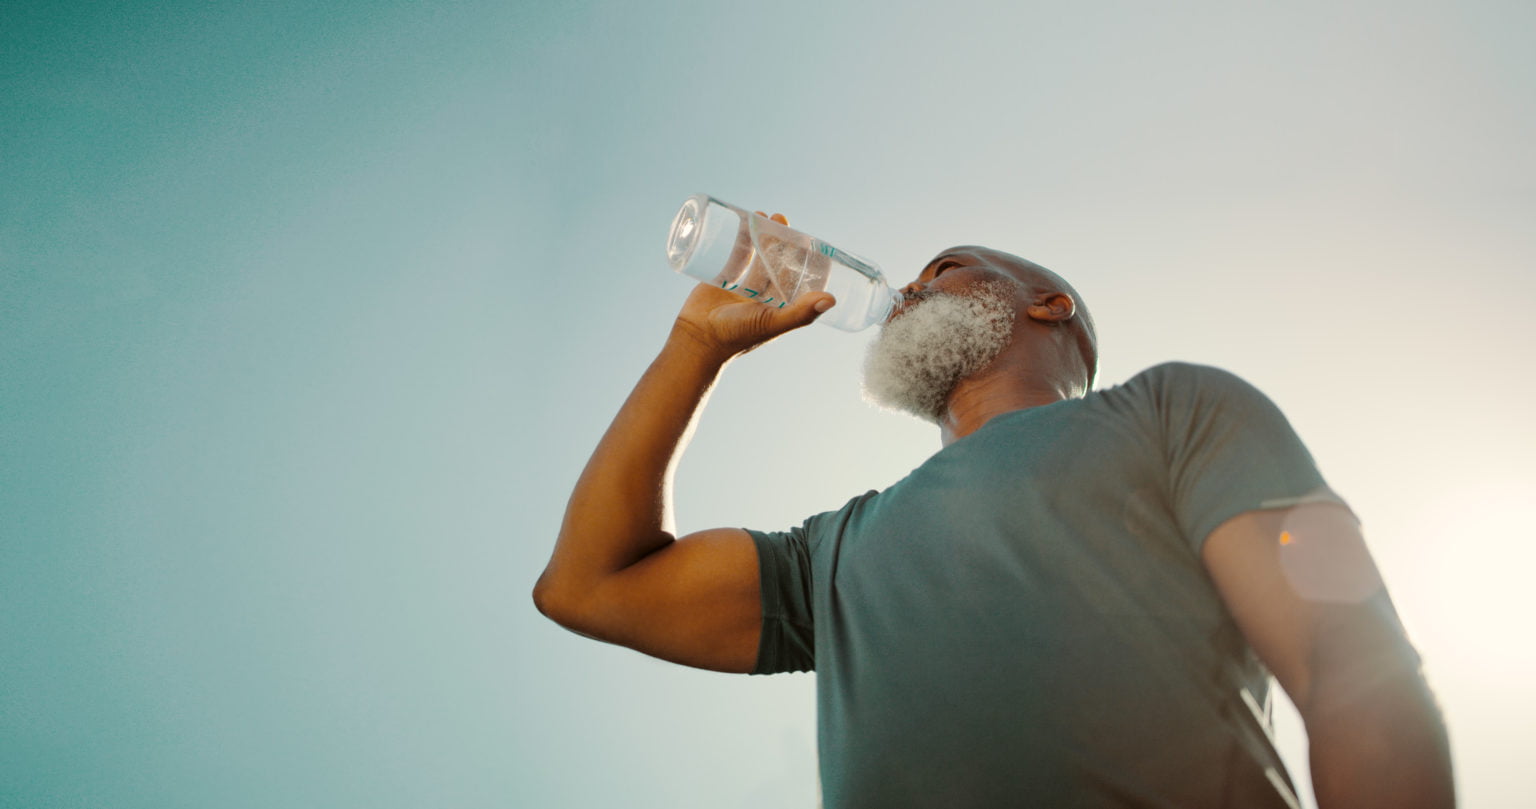 Make sure you’re hydrated after exercising